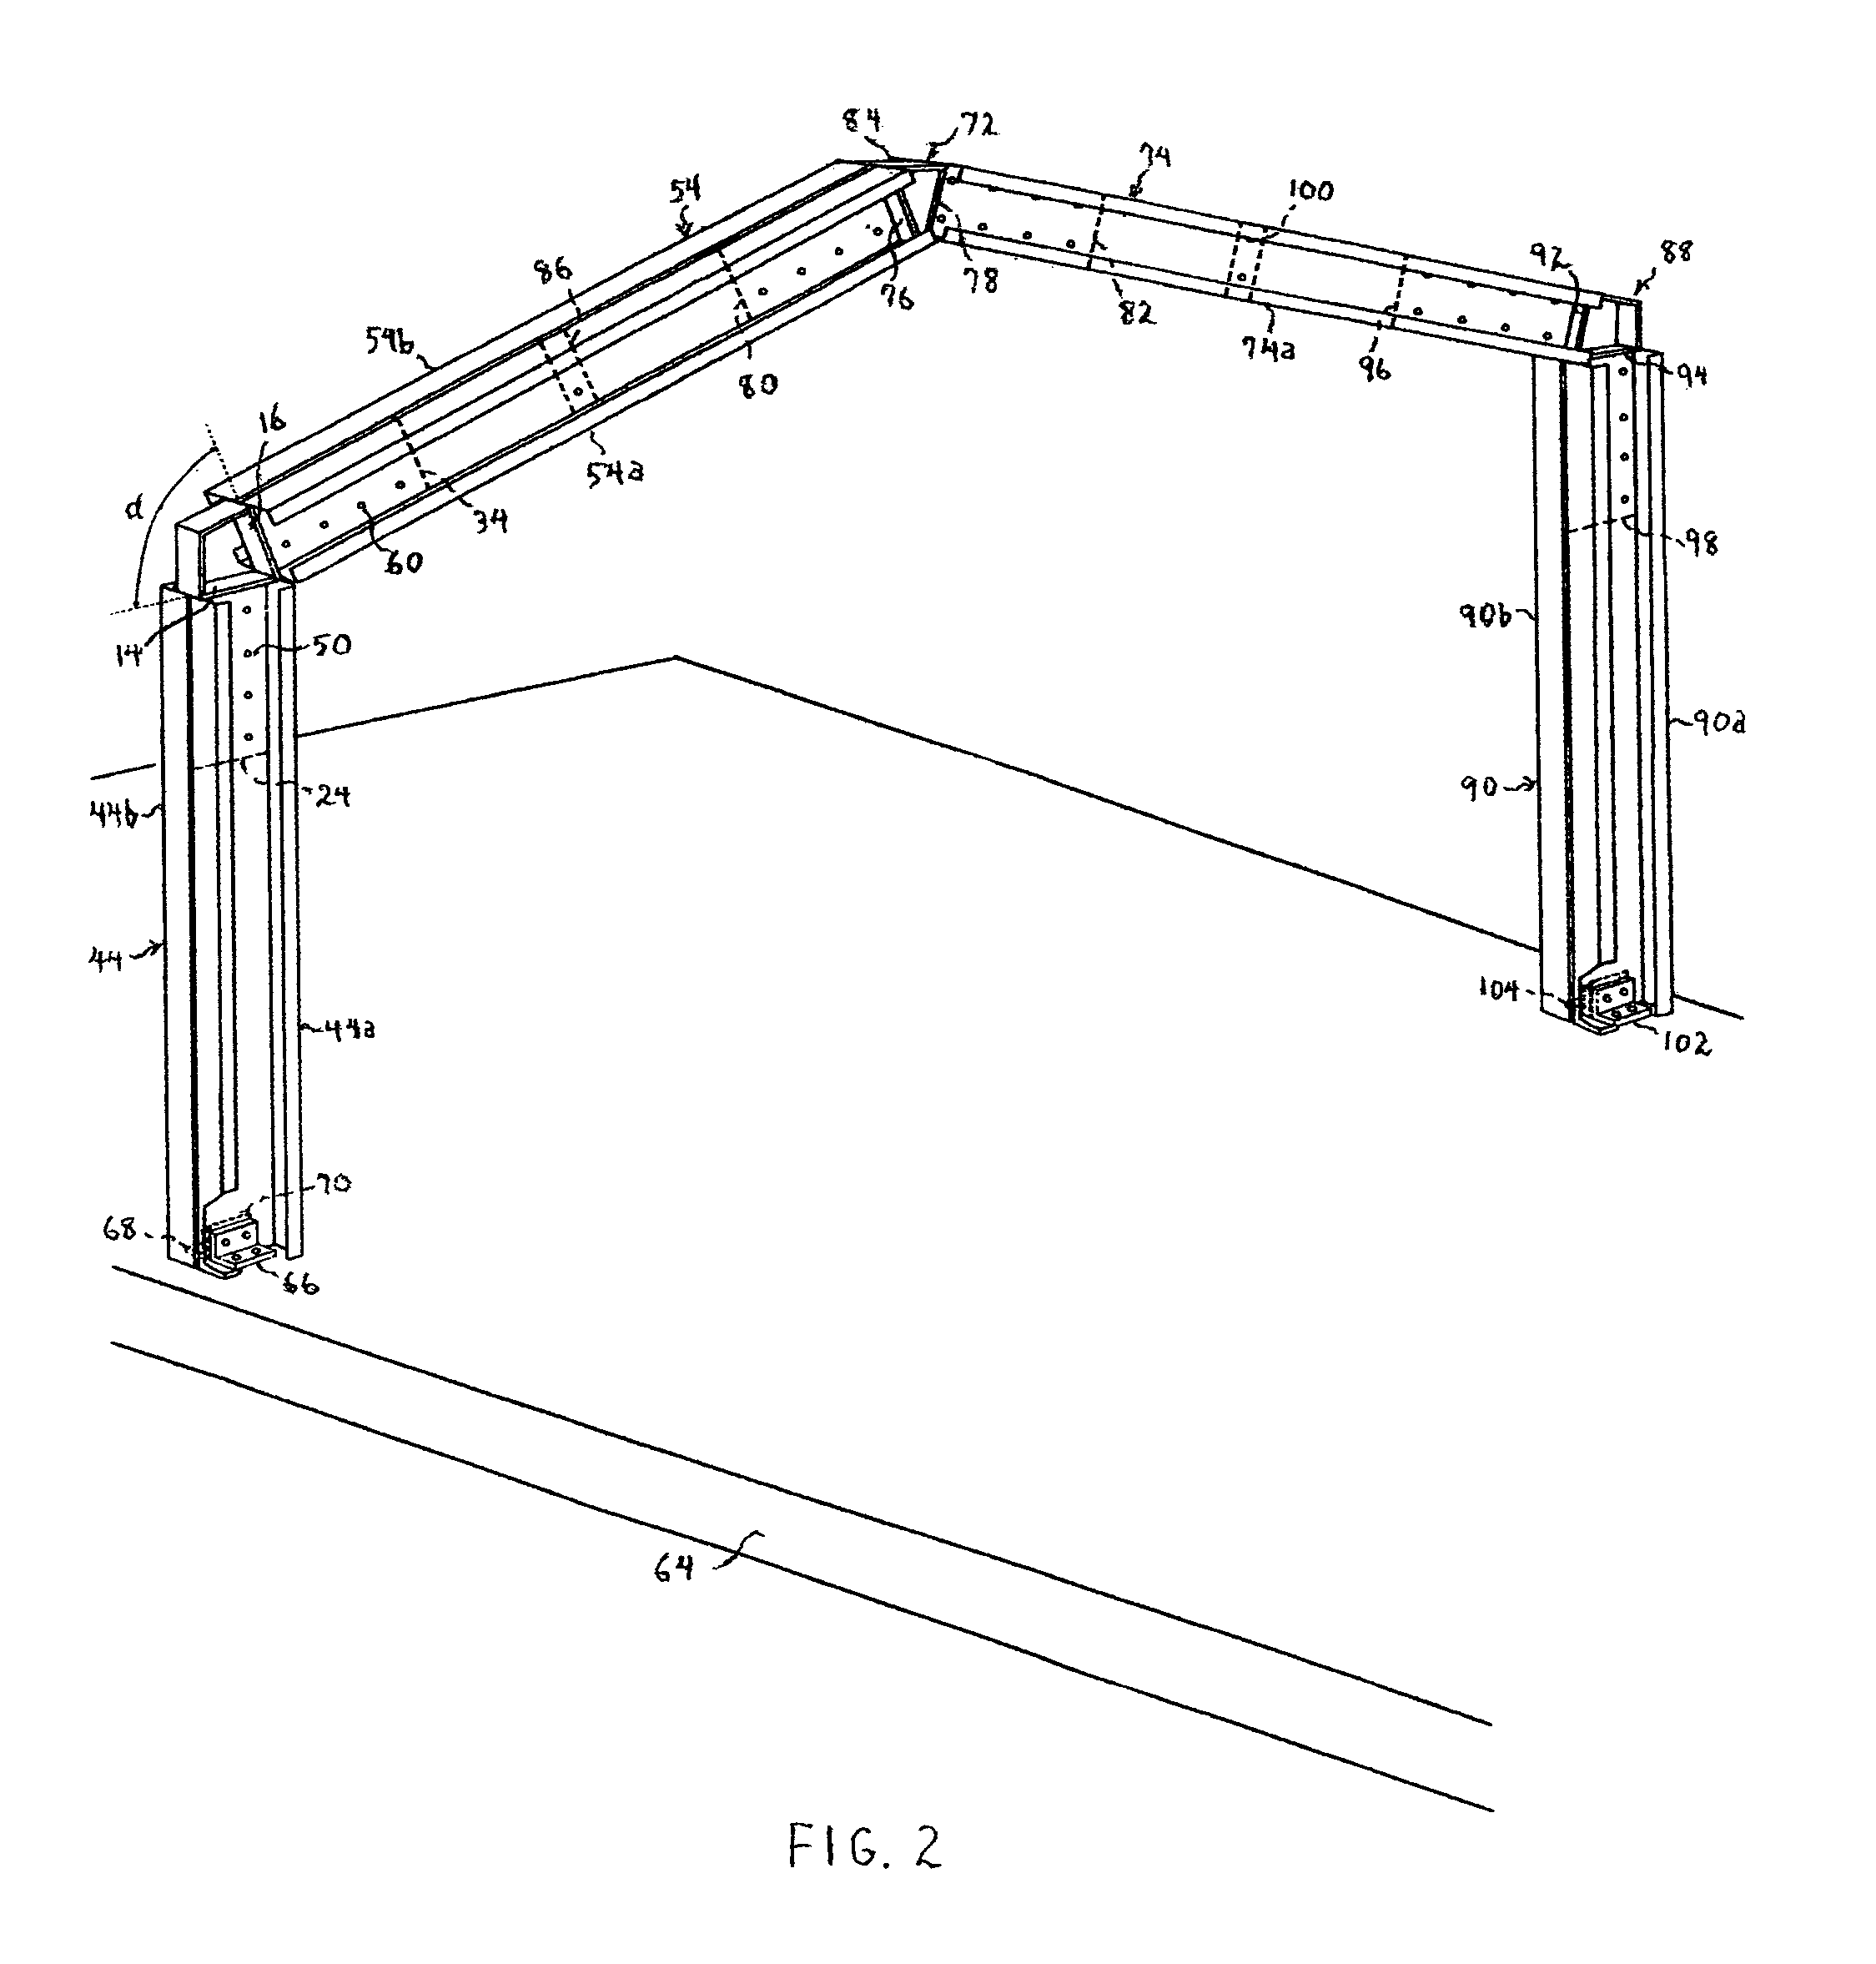 Framing in a building assembly